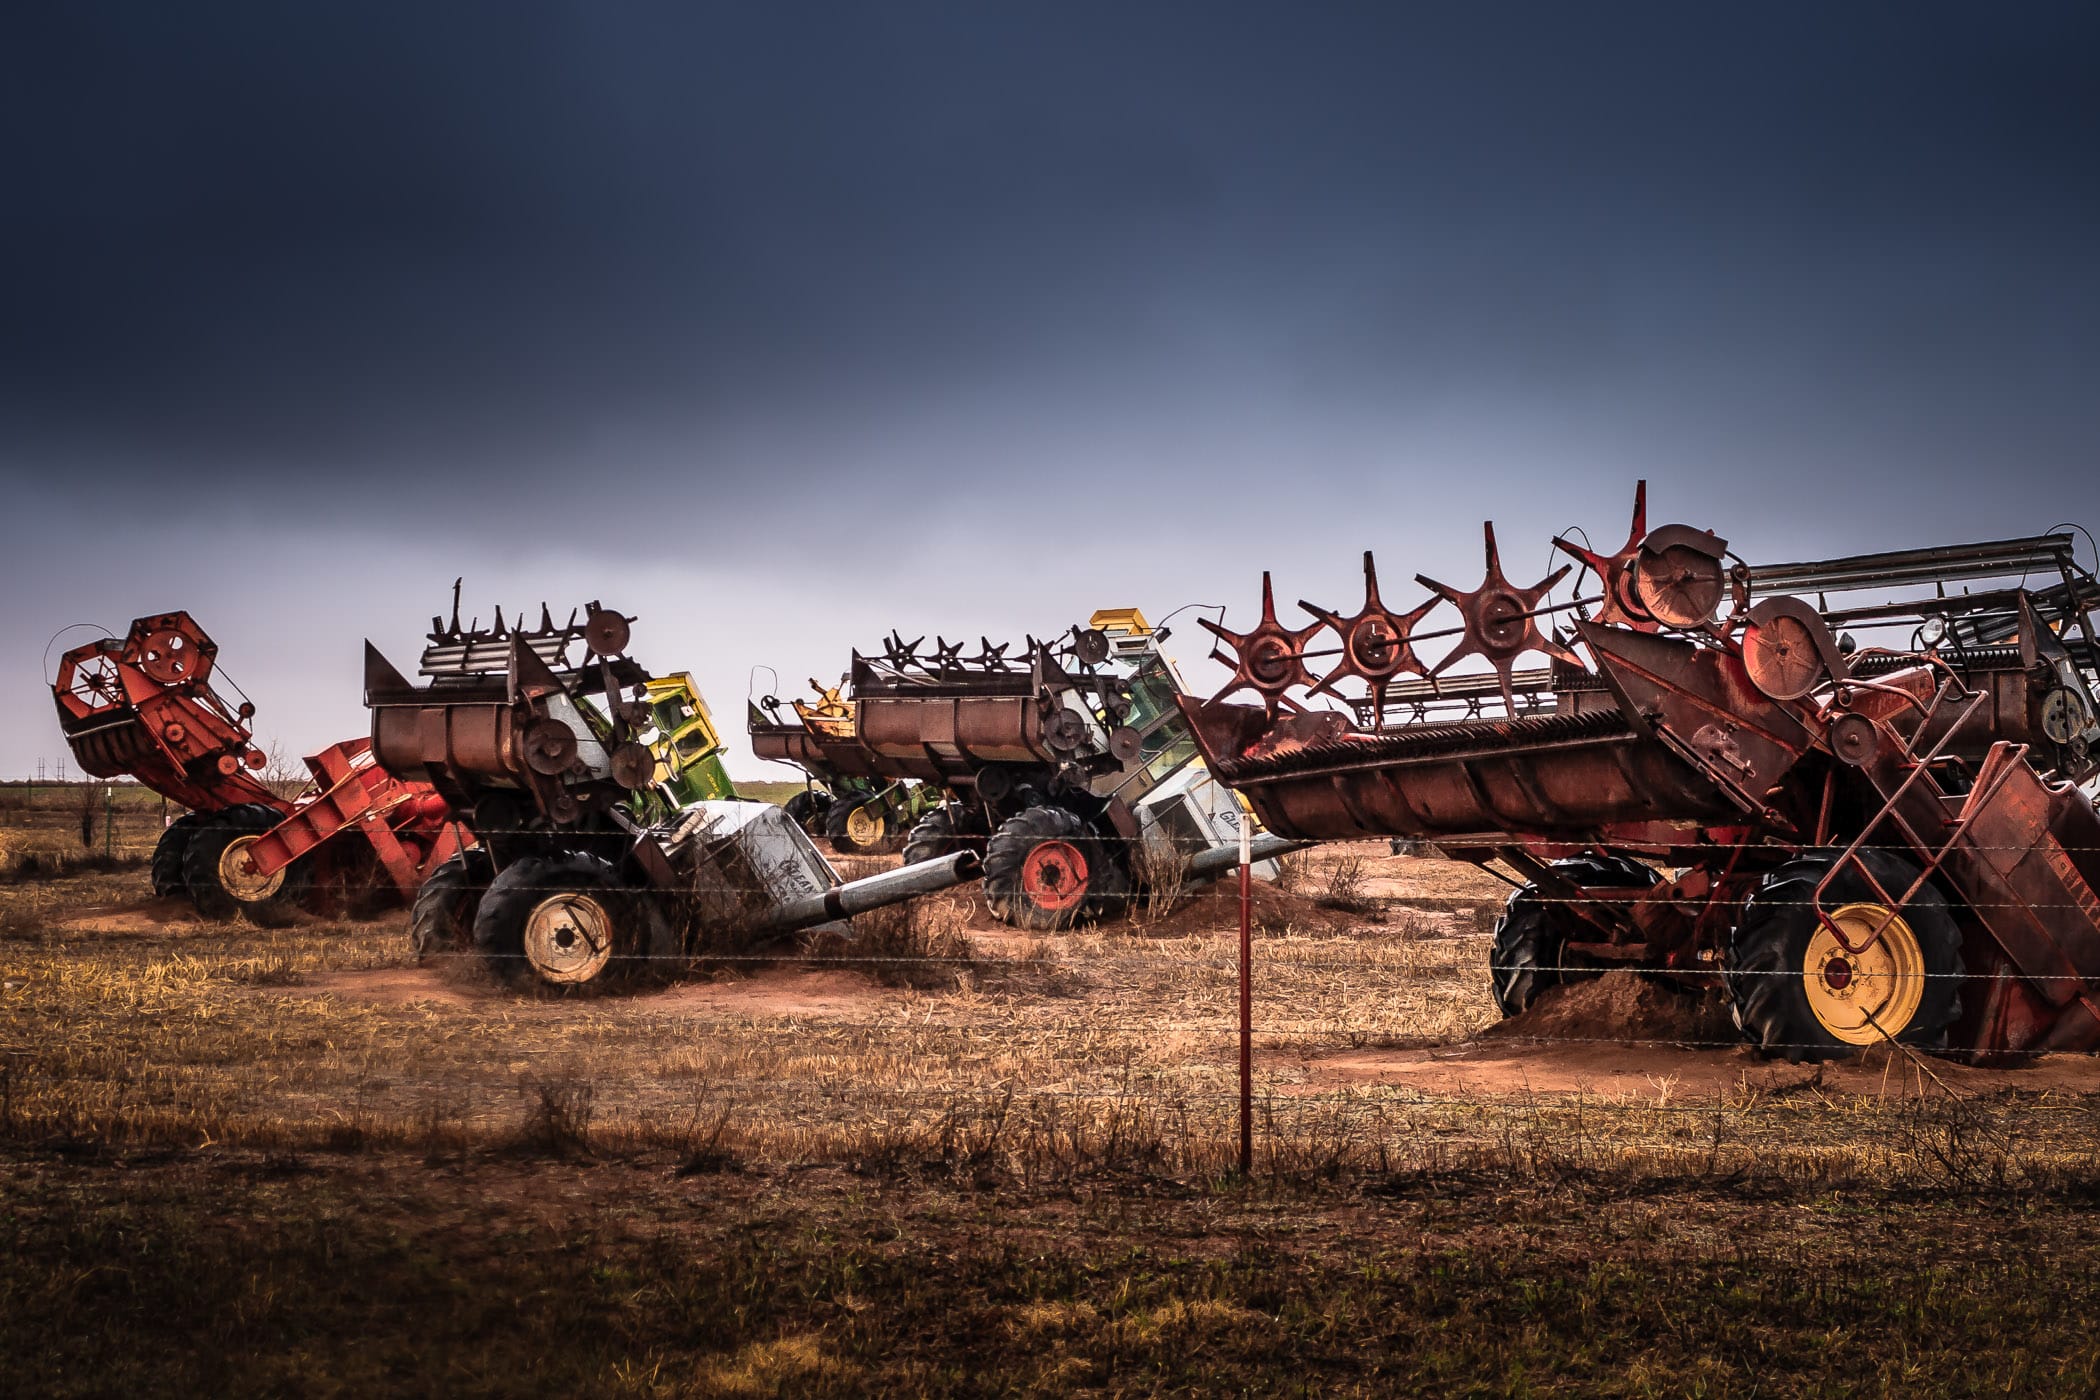 A portion of Combine City—over a dozen combine harvesters buried "nose-first" in a field—outside of Canyon, Texas.